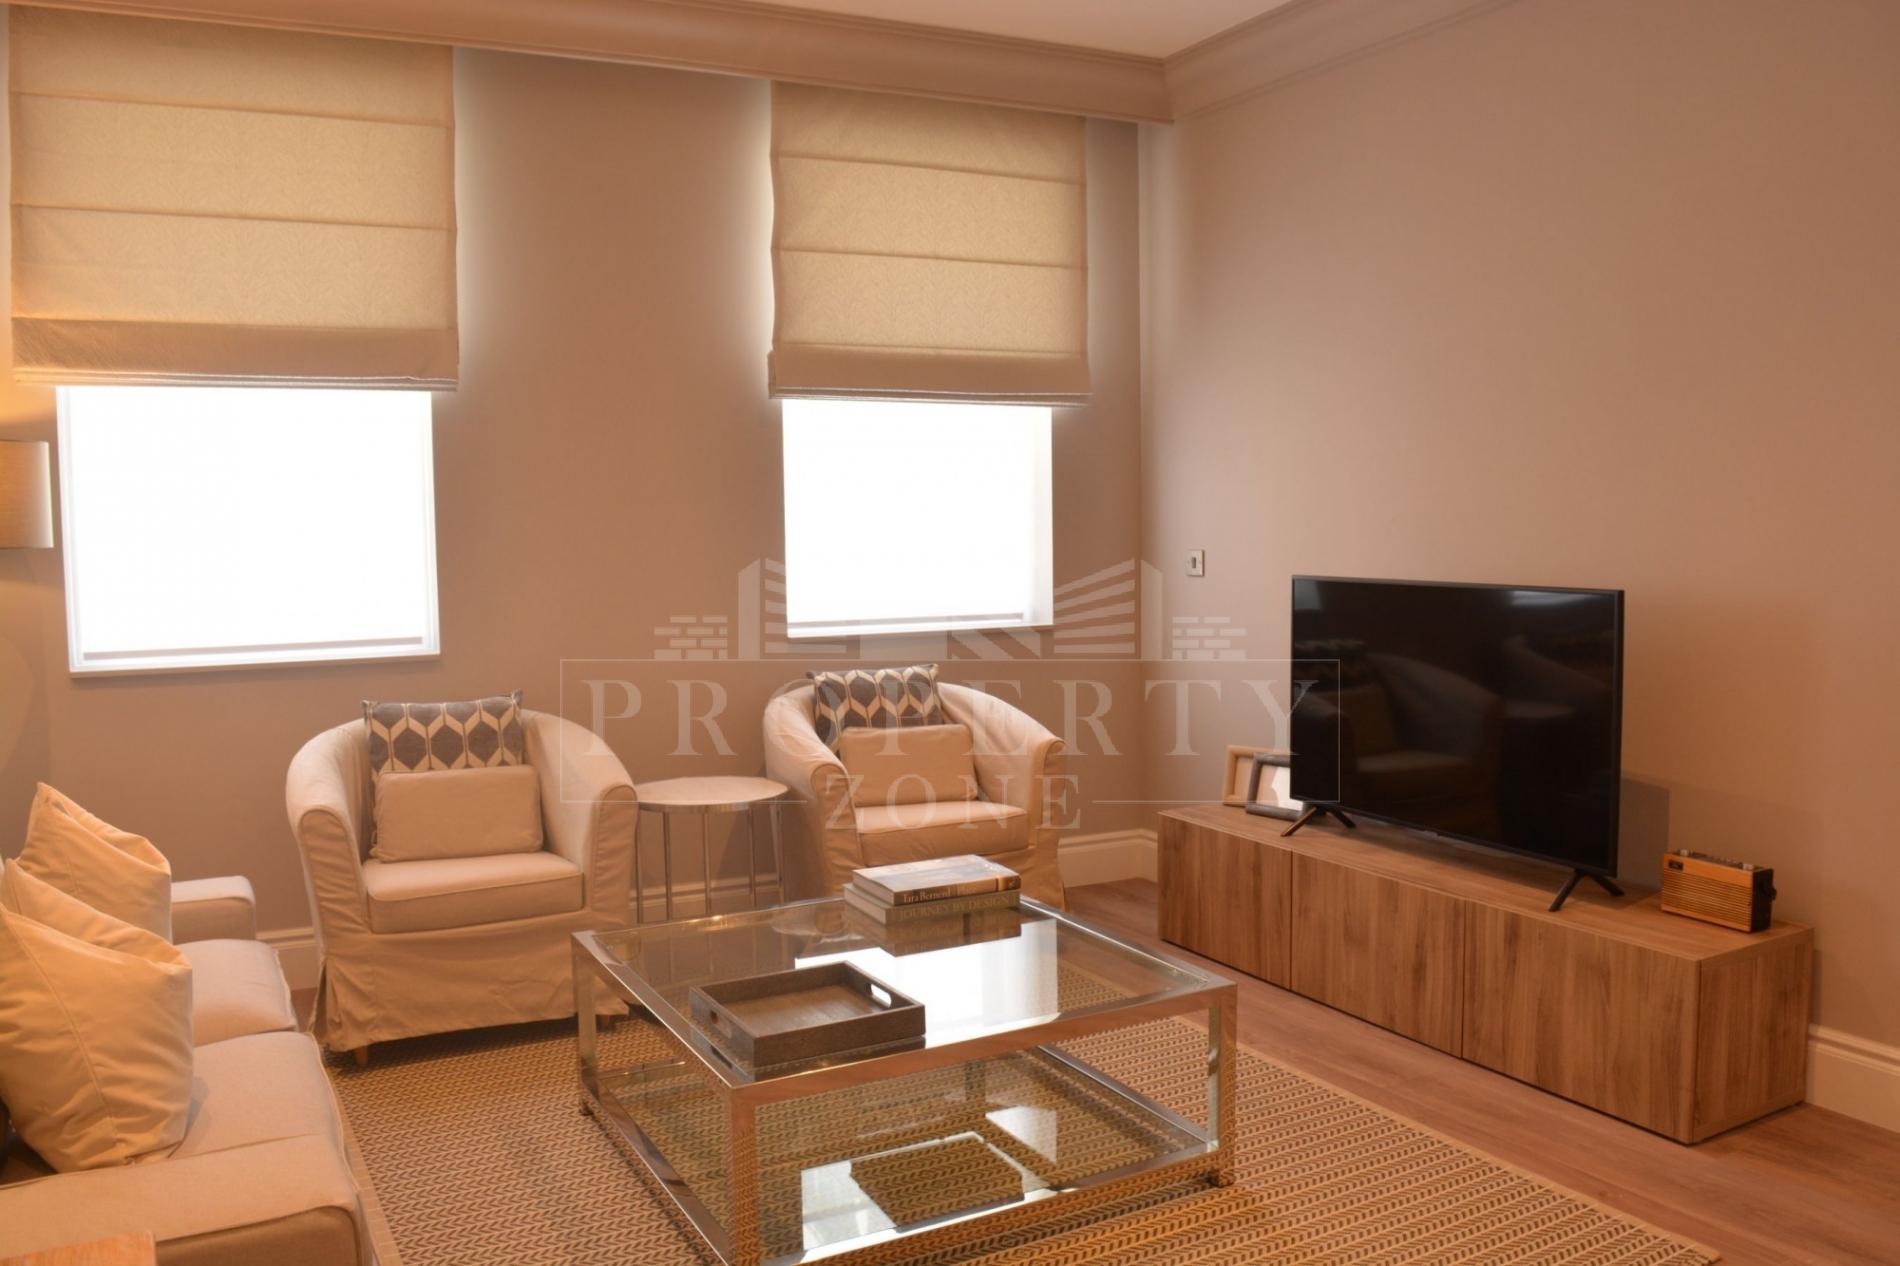 2 Bedroom Apartment For Rental In Town Gibraltar